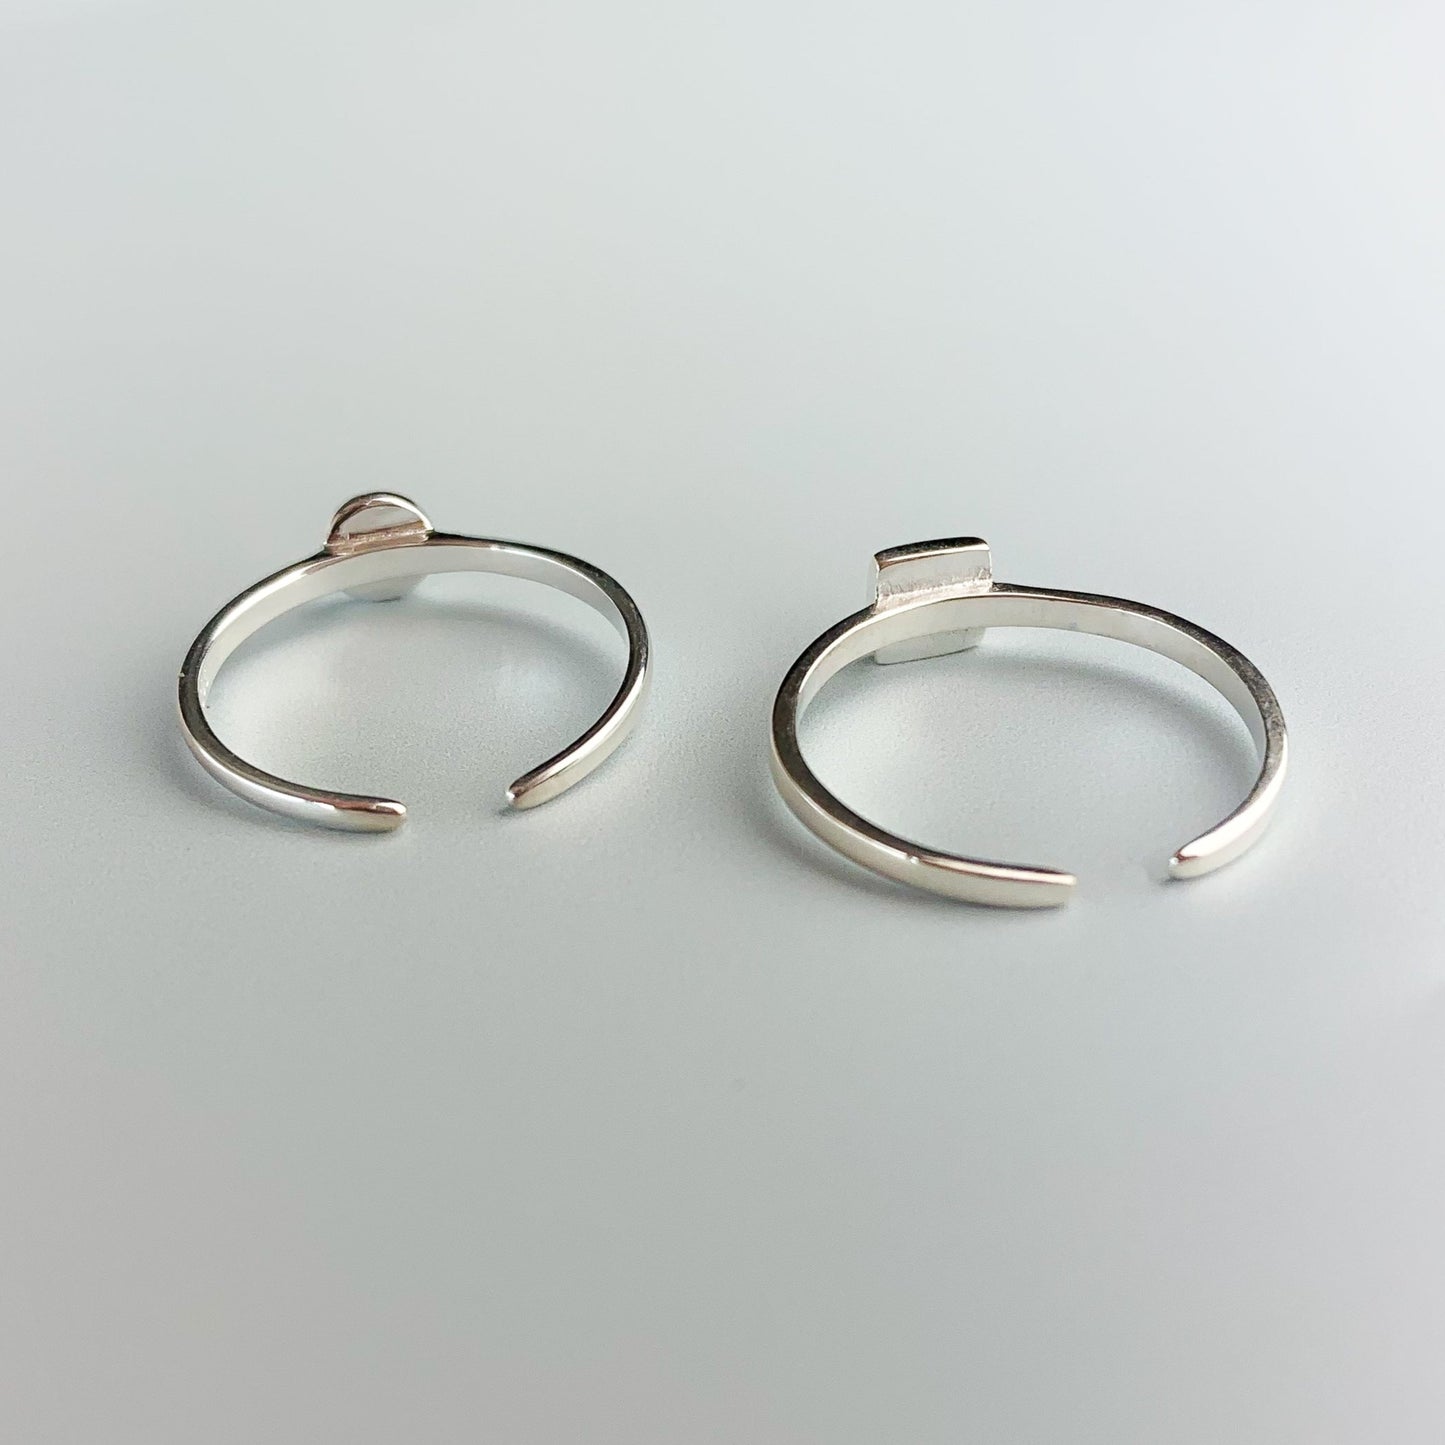 Adjustable Square, Circle or Triangle Ring